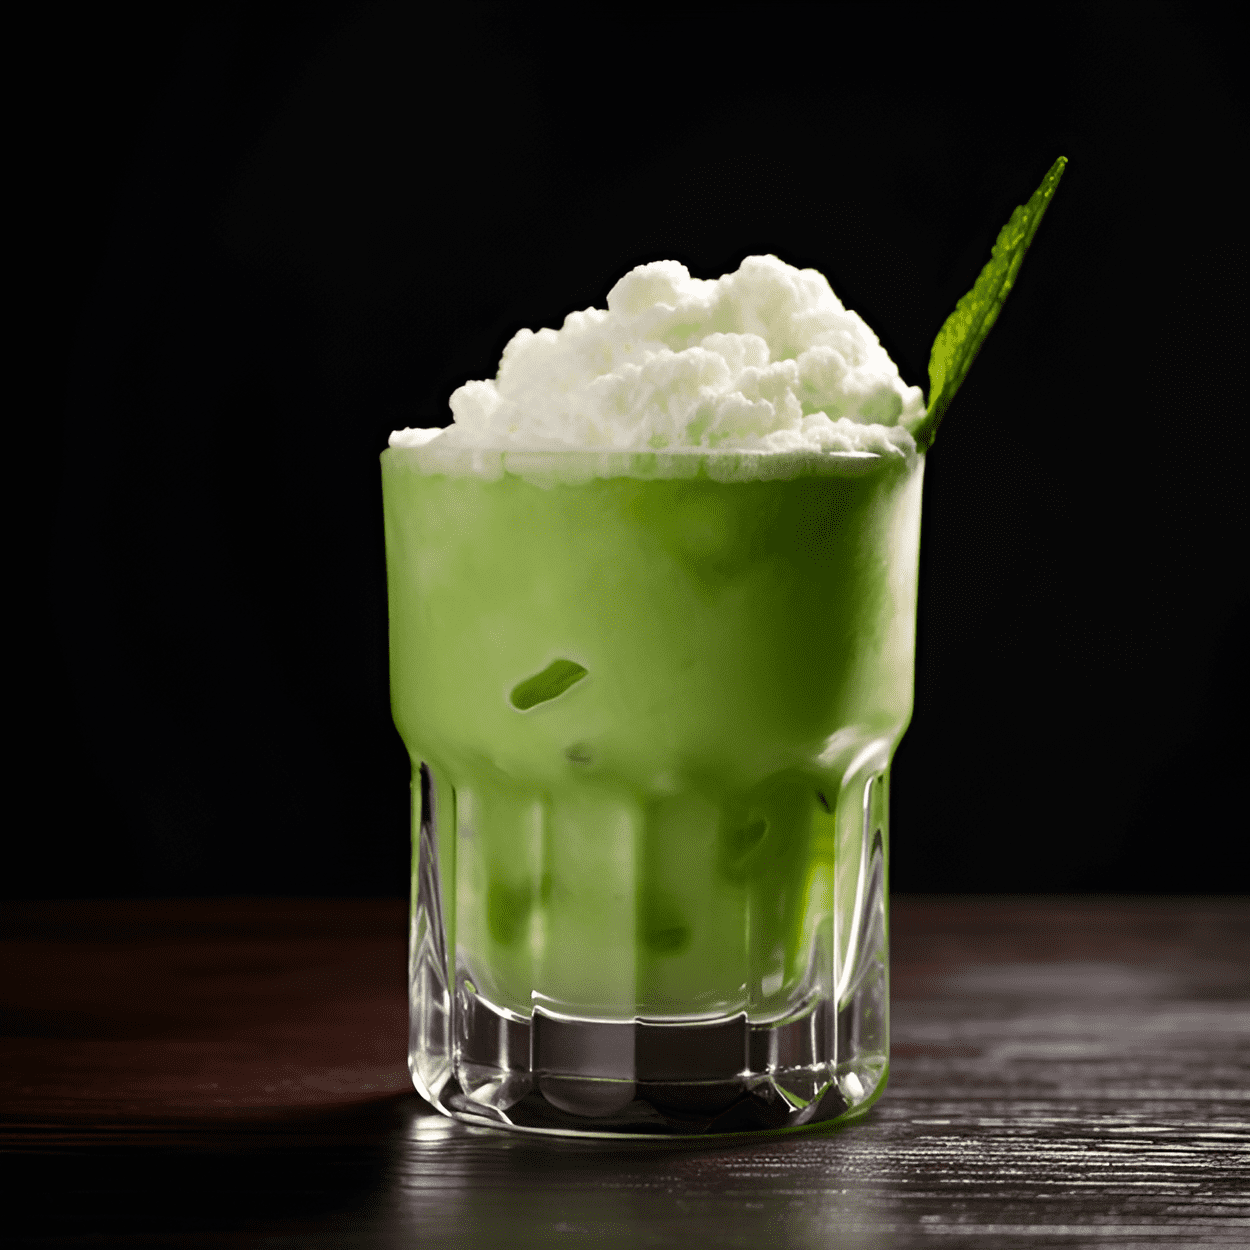 Alligator Sperm Recipe - The Alligator Sperm cocktail is sweet and creamy, with a strong pineapple flavor. The melon liqueur adds a fruity note, while the cream gives it a smooth and rich texture. It's a very refreshing and enjoyable drink, perfect for those who like sweet and fruity cocktails.